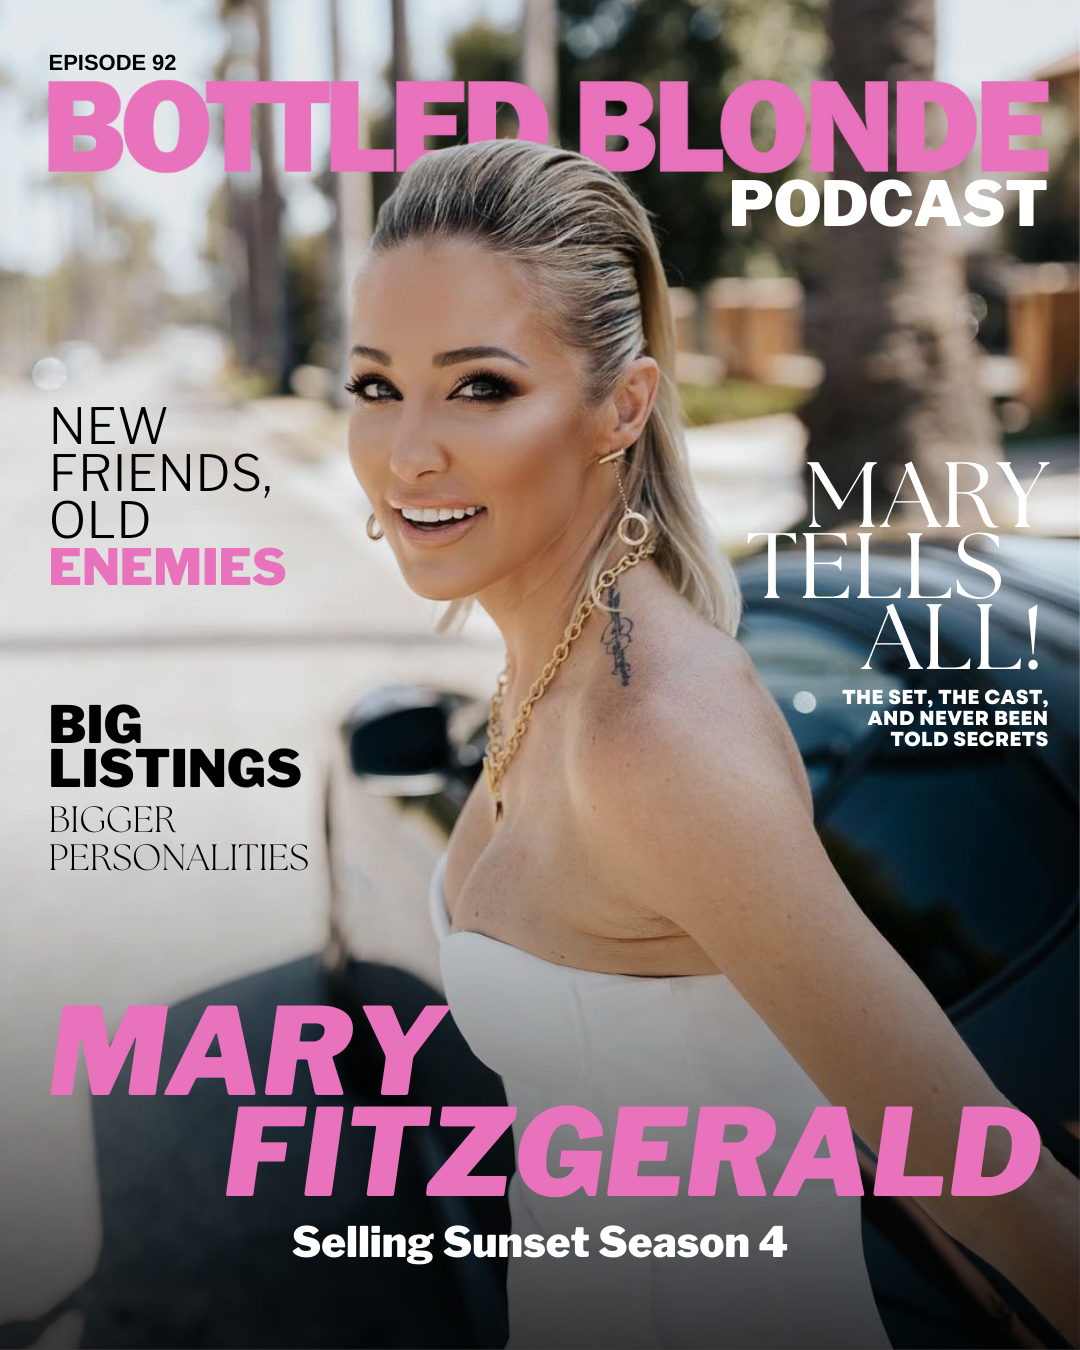 Kristina McInnis Hosts The Talented Mary Fitzgerald On The Bottled Blonde Podcast